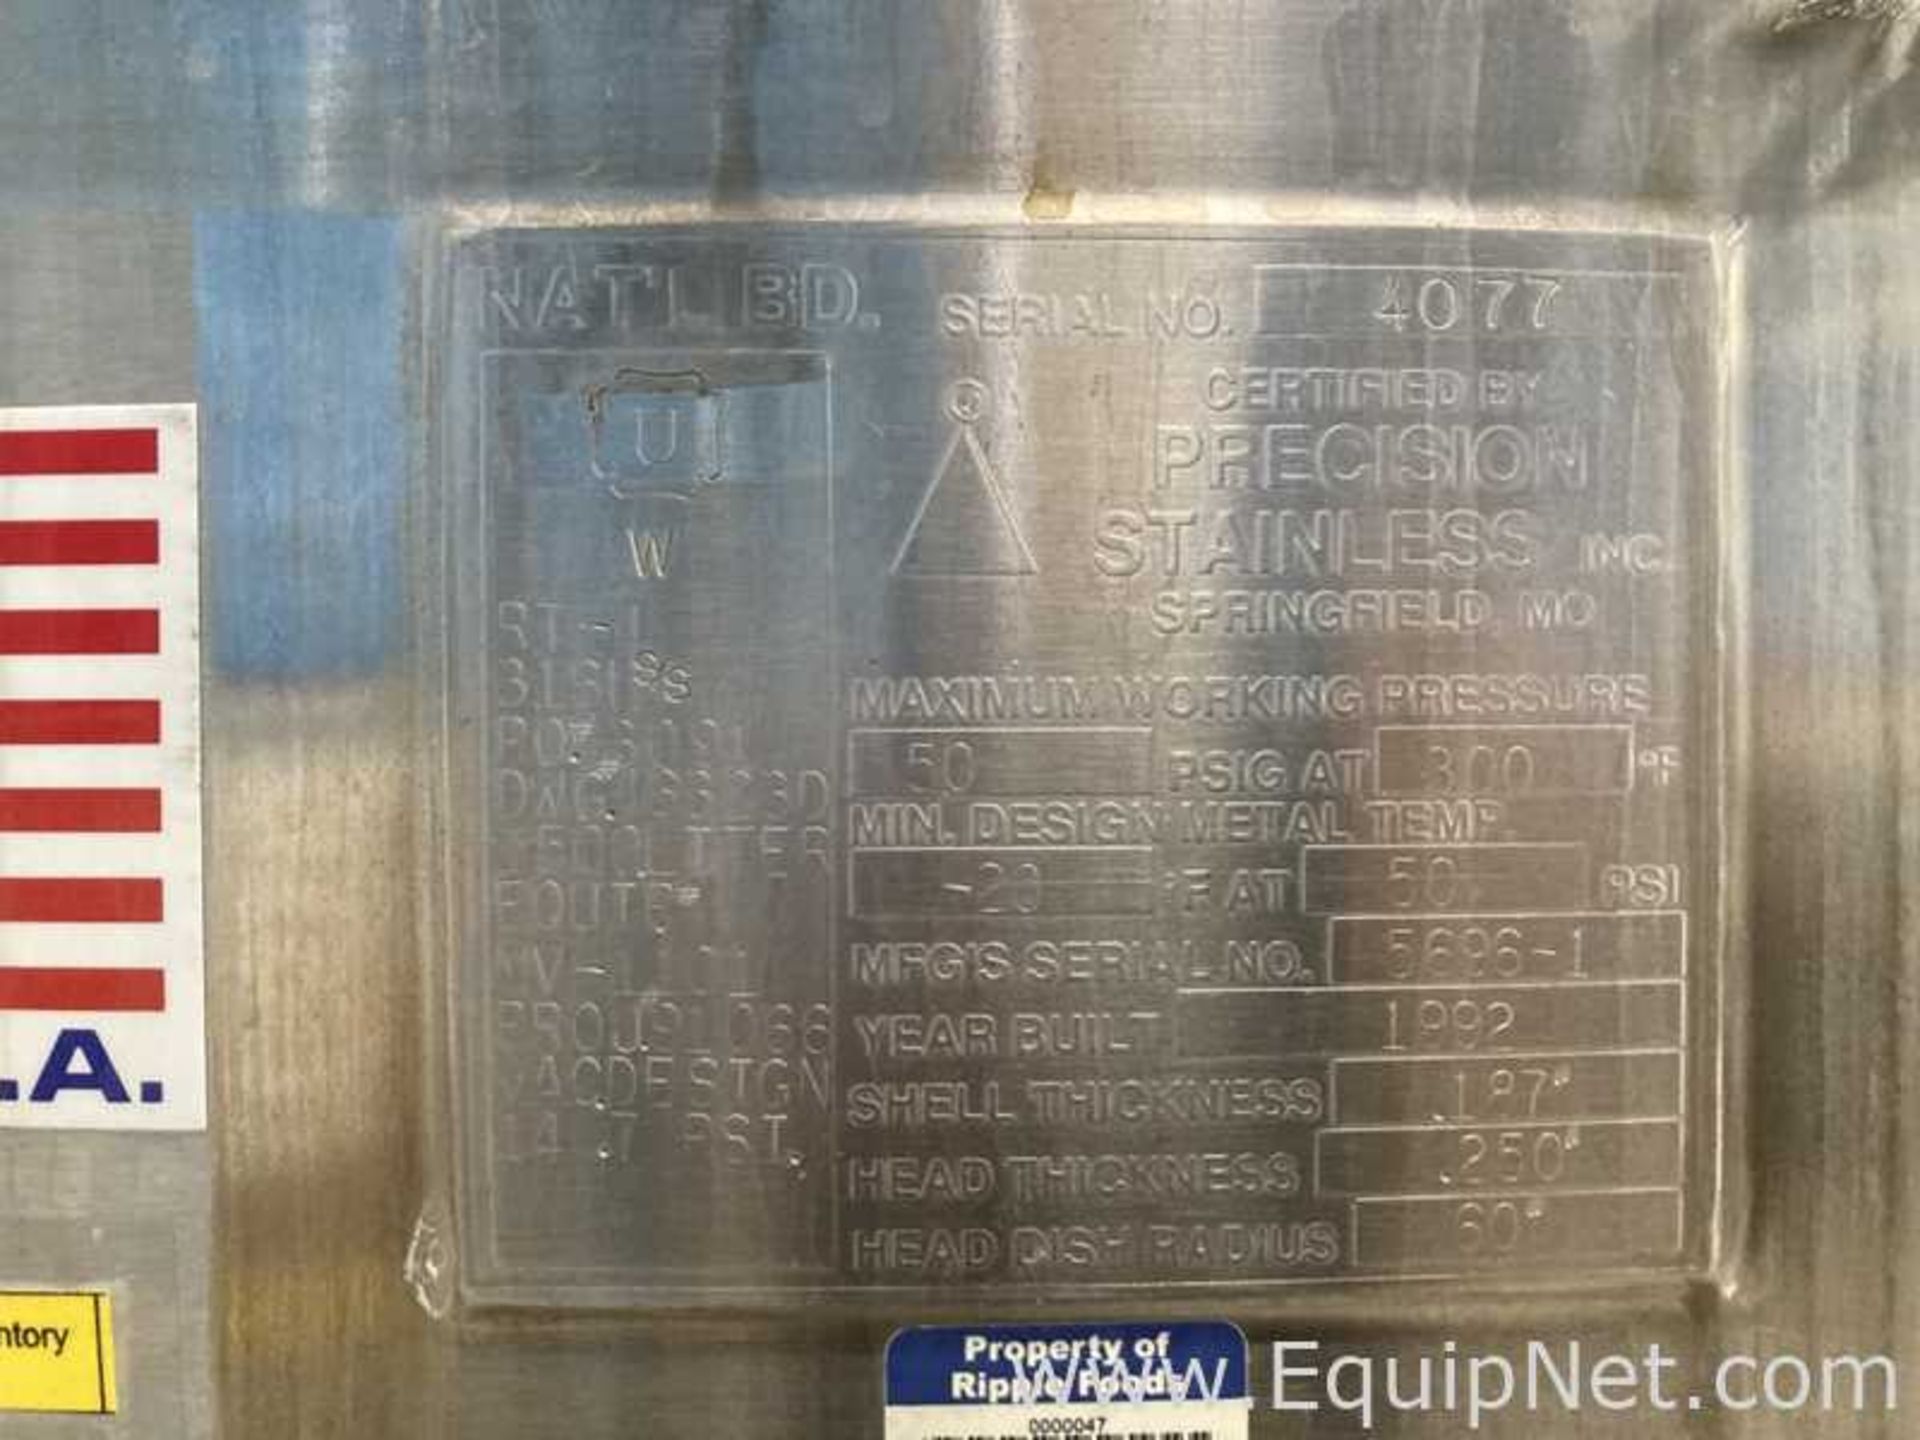 Precision Stainless 1500 Liter Stainless Steel Tank - Image 4 of 14